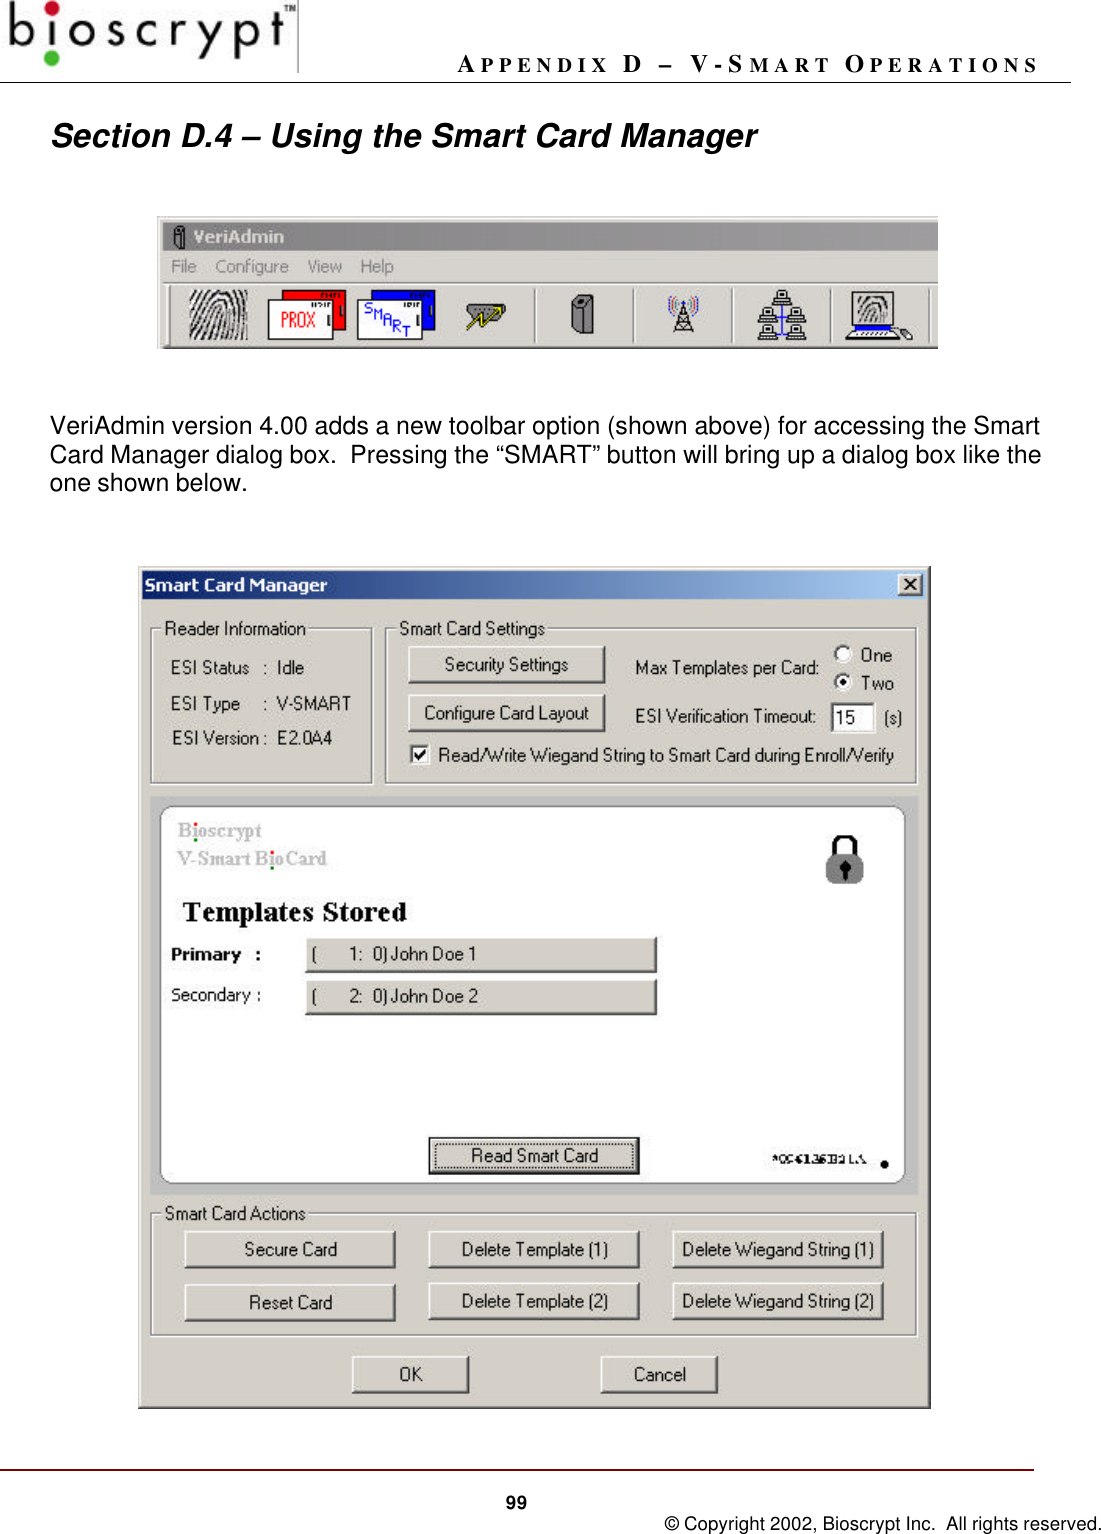 APPENDIX D – V-SMART OPERATIONS99 © Copyright 2002, Bioscrypt Inc.  All rights reserved.Section D.4 – Using the Smart Card ManagerVeriAdmin version 4.00 adds a new toolbar option (shown above) for accessing the SmartCard Manager dialog box.  Pressing the “SMART” button will bring up a dialog box like theone shown below.